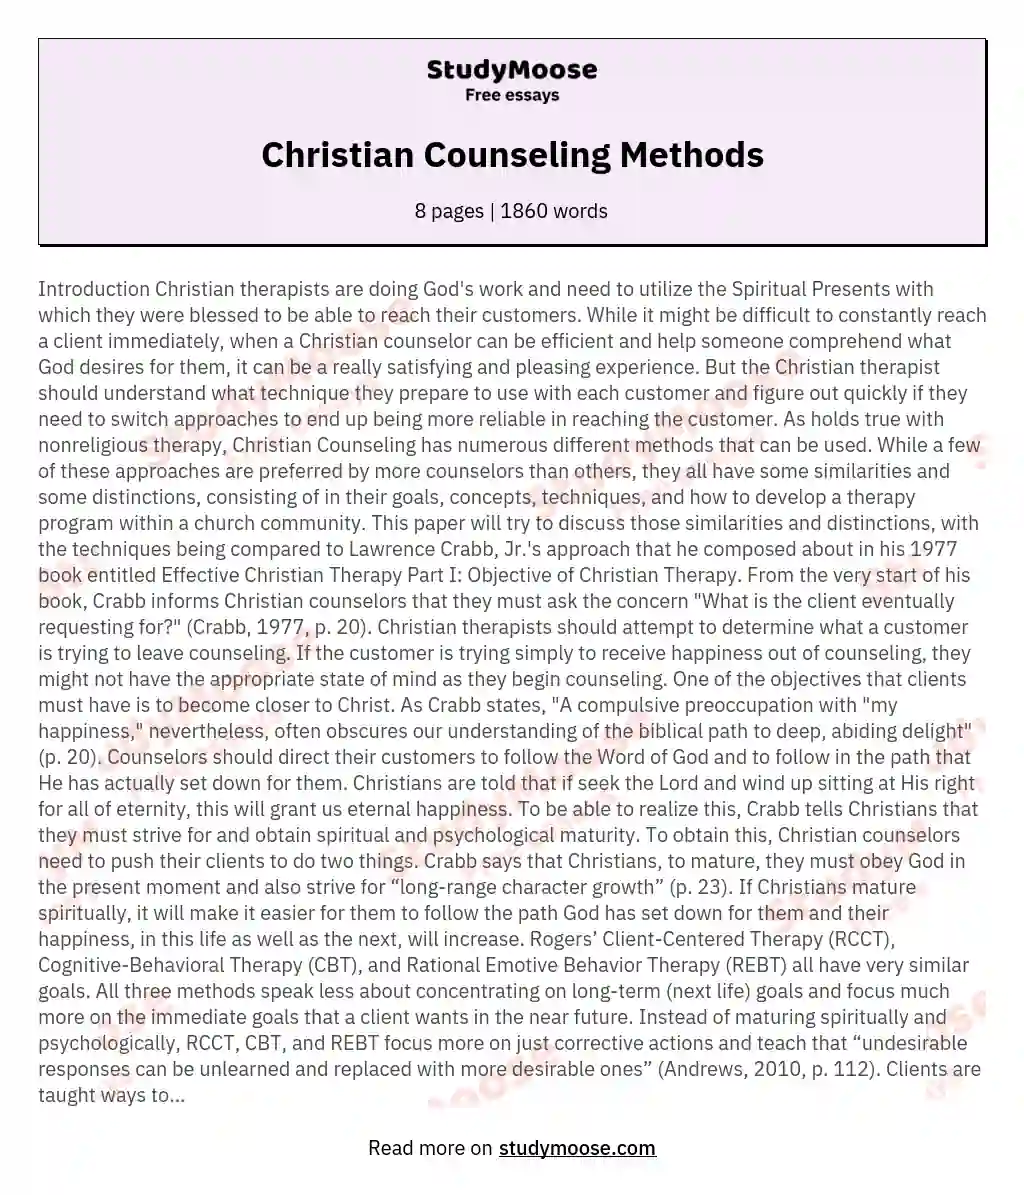 Christian Counseling Methods essay